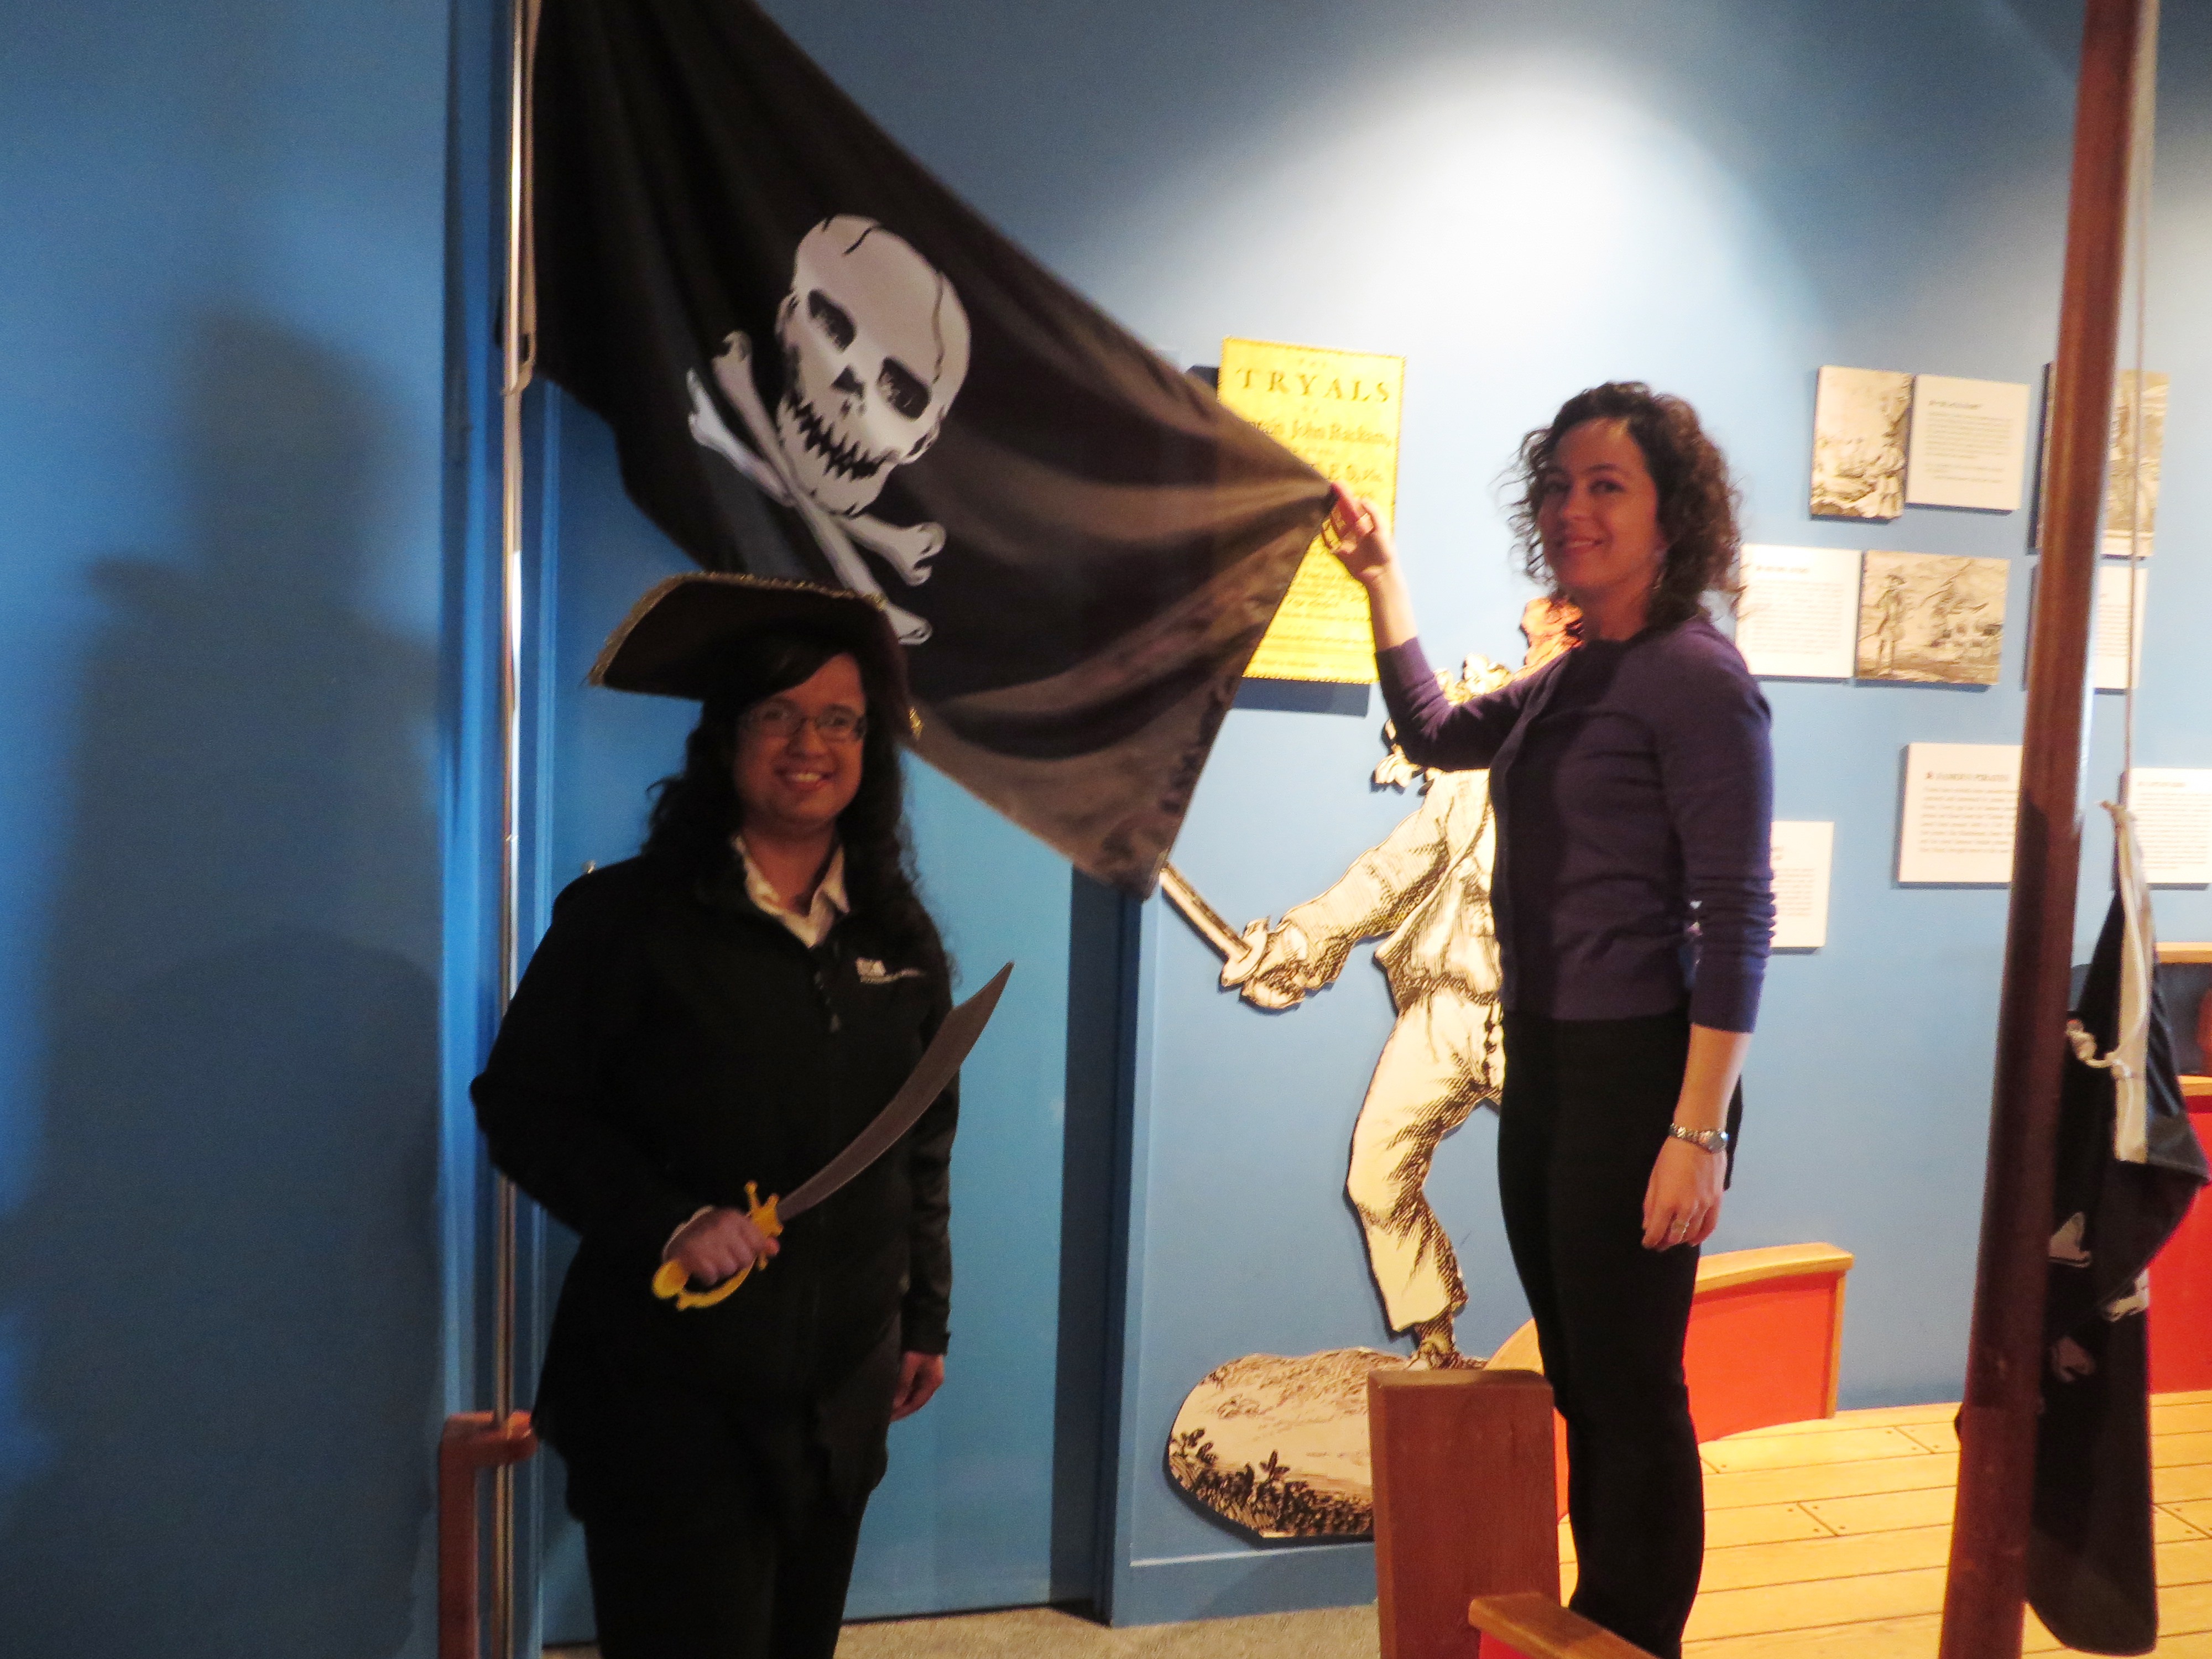 Kristy dressed as a pirate, standing in front of a jolly roger pirate flag